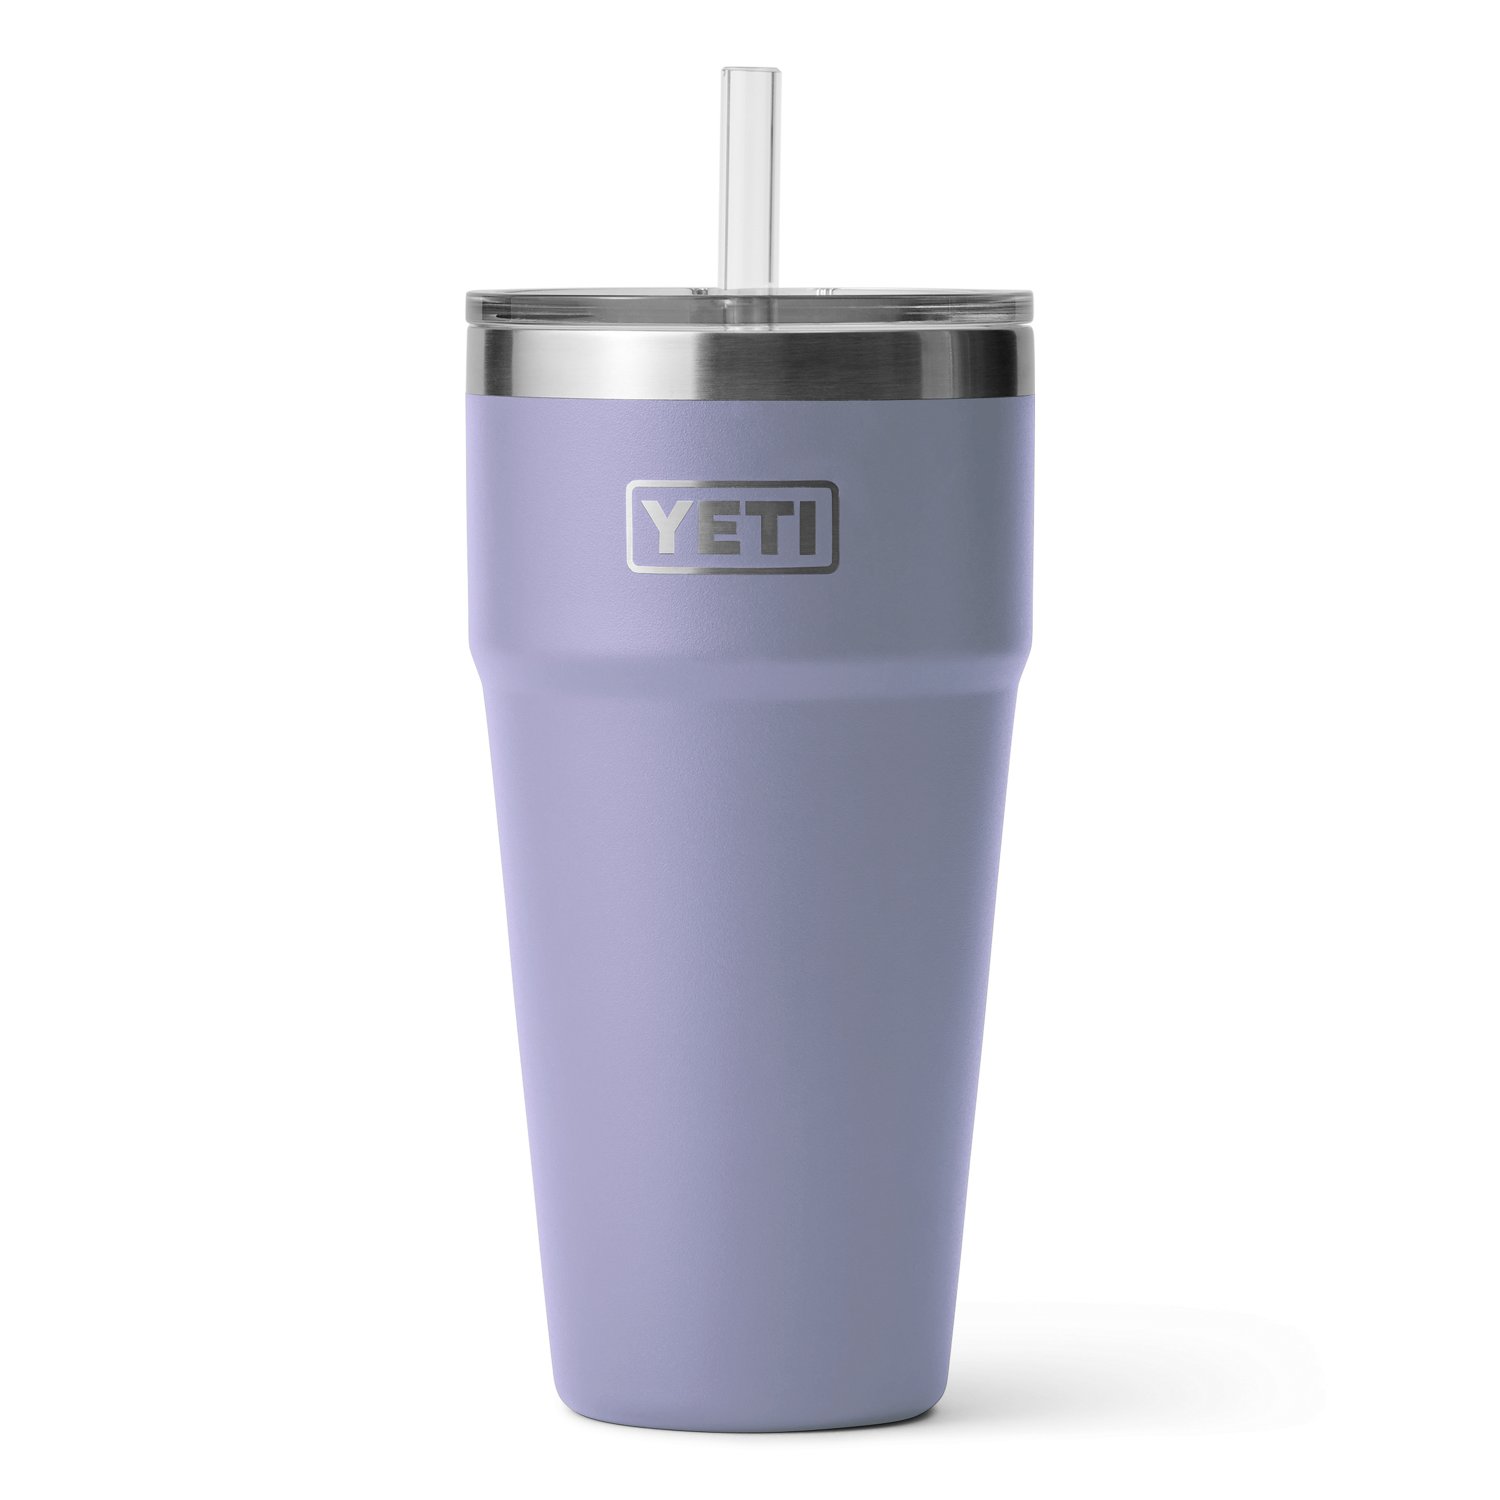 https://academy.scene7.com/is/image/academy//drinkware/yeti-rambler-26-oz-stackable-cup-with-straw-lid-21071501743-purple/og-image/cb9b5add3709494b8be58d8061284df9